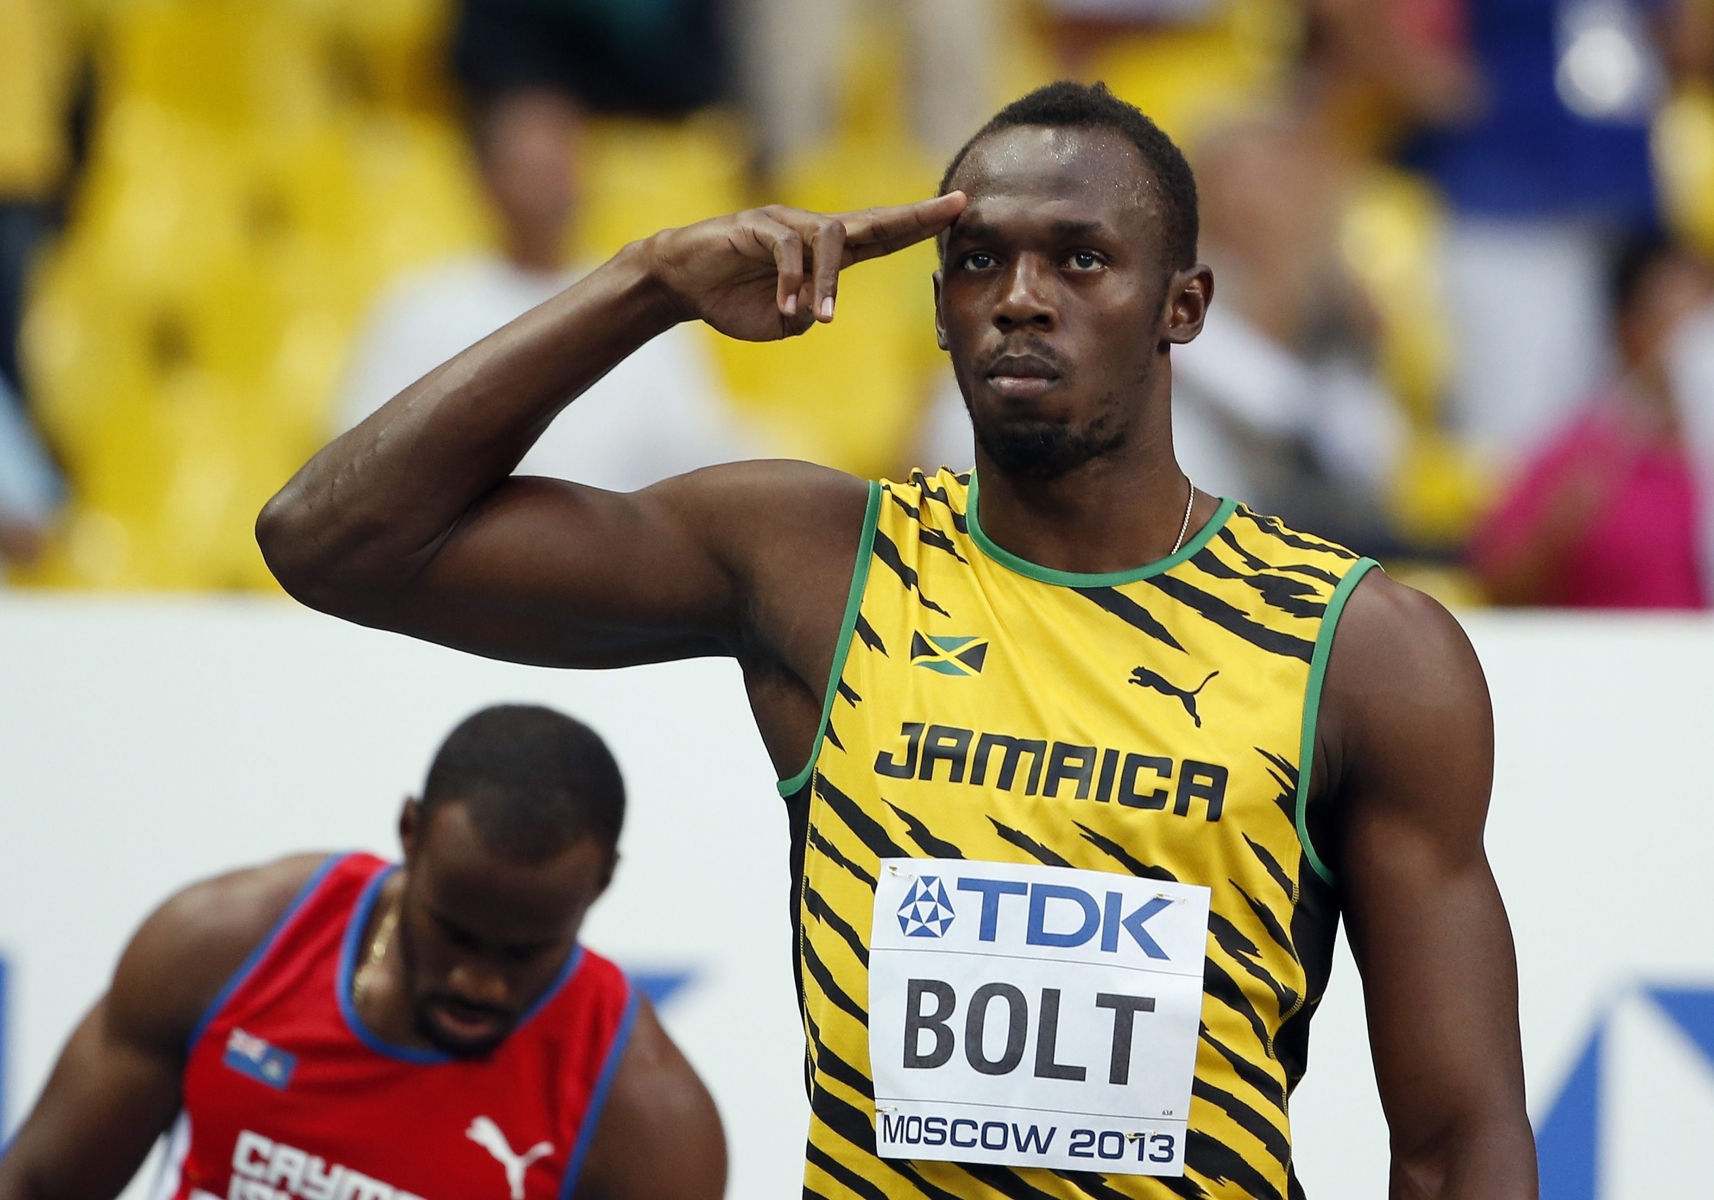 epa03819479 Usain Bolt of Jamaica gestures before his race in the men's 100m heats during the 14th IAAF World Championships at Luzhniki stadium in Moscow, Russia, 10 August 2013.  EPA/KERIM OKTEN